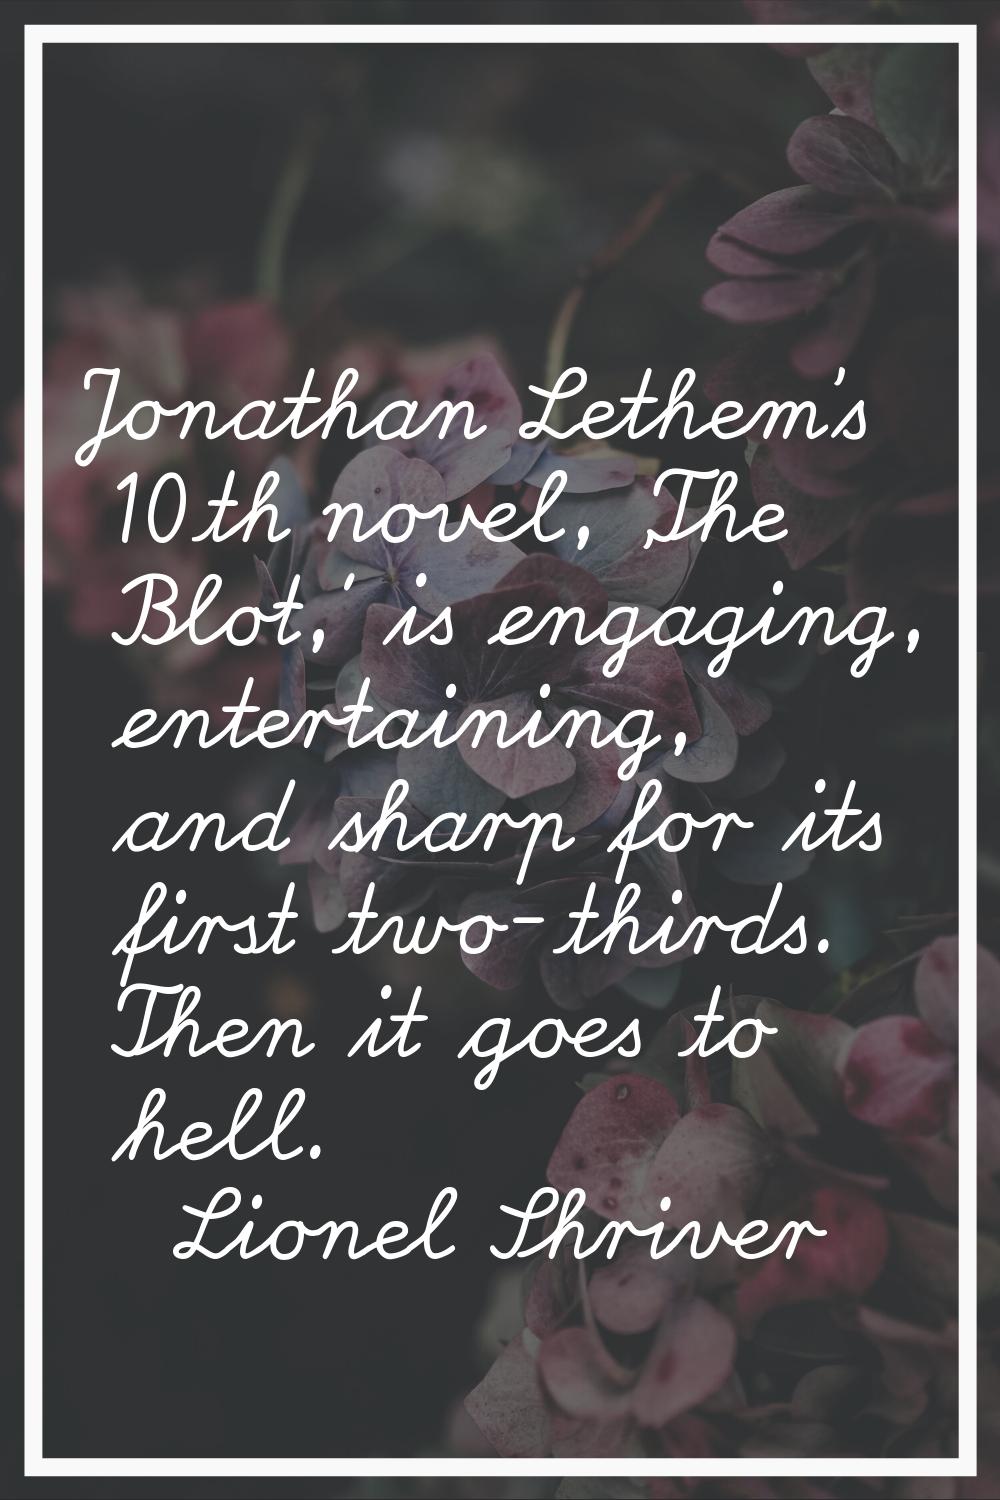 Jonathan Lethem's 10th novel, 'The Blot,' is engaging, entertaining, and sharp for its first two-th